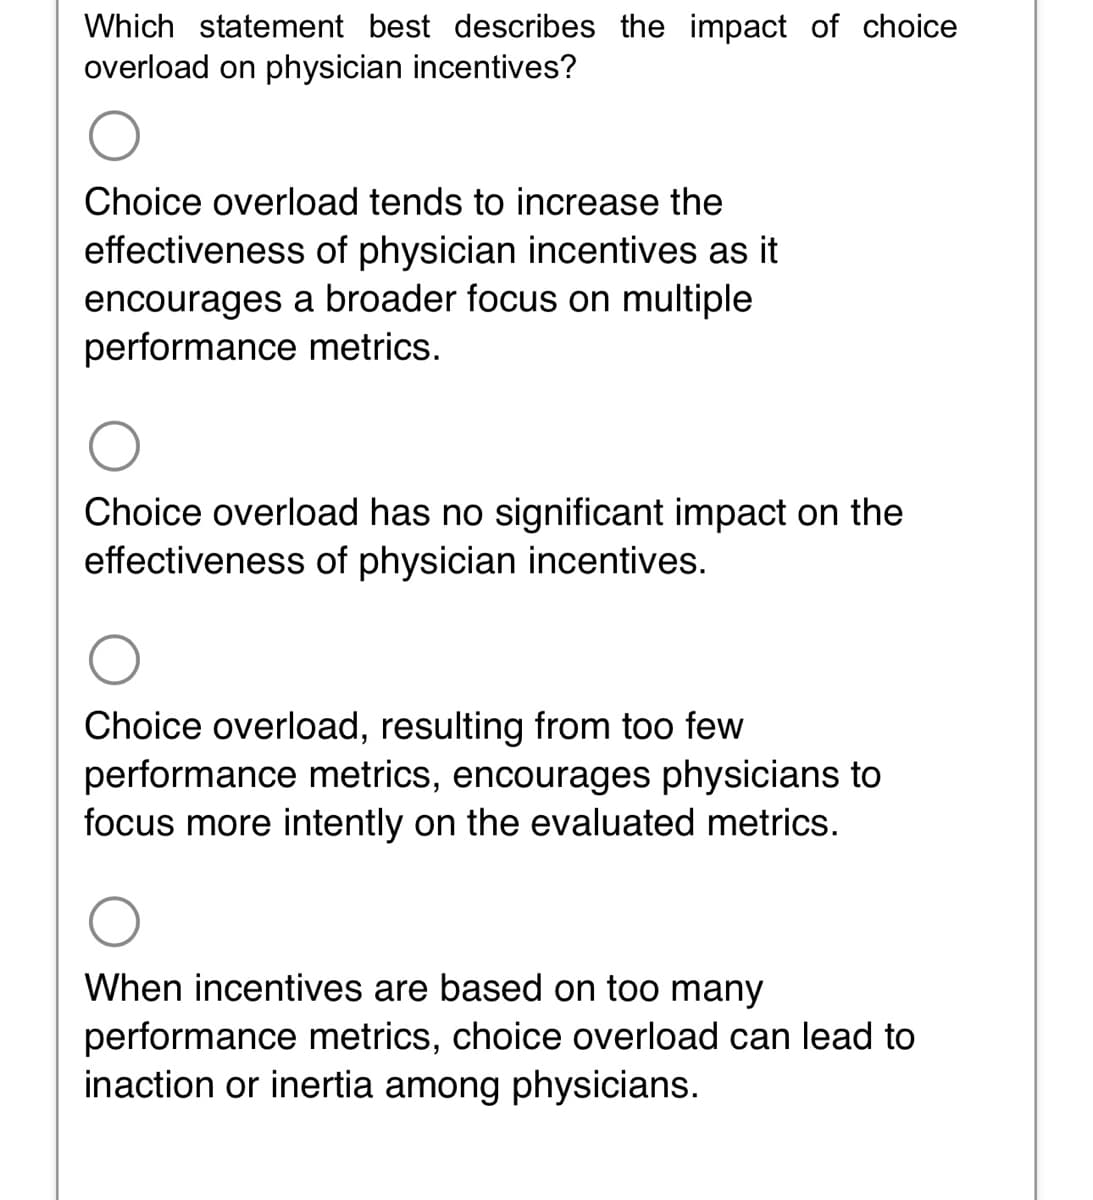 Which statement best describes the impact of choice
overload on physician incentives?
Choice overload tends to increase the
effectiveness of physician incentives as it
encourages a broader focus on multiple
performance metrics.
Choice overload has no significant impact on the
effectiveness of physician incentives.
Choice overload, resulting from too few
performance metrics, encourages physicians to
focus more intently on the evaluated metrics.
When incentives are based on too many
performance metrics, choice overload can lead to
inaction or inertia among physicians.